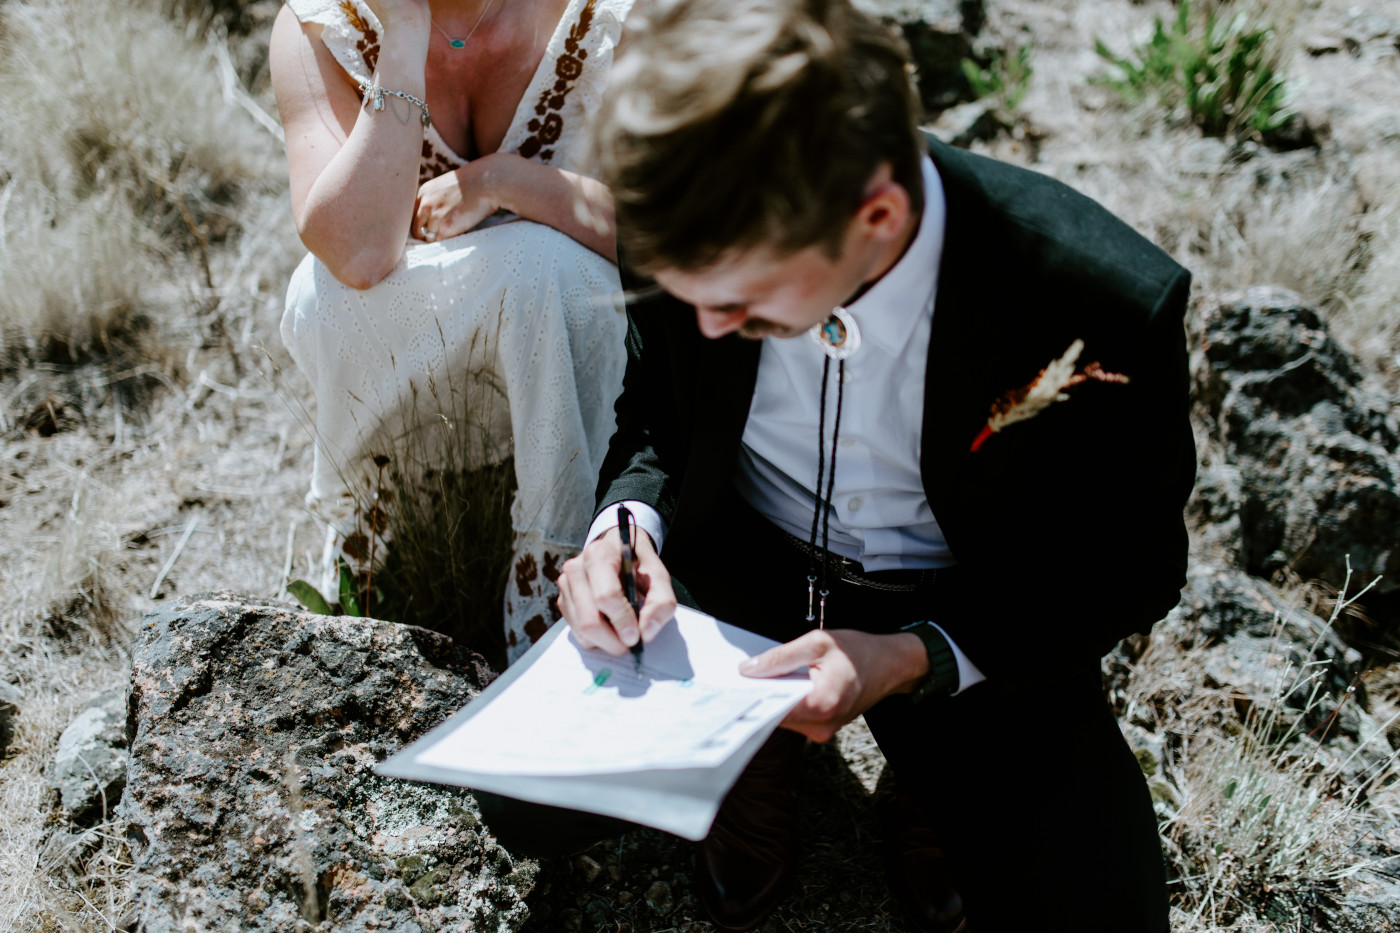 Greyson and Emily finalizing their elopement ceremony with paperwork. Elopement photography in the Central Oregon desert by Sienna Plus Josh.